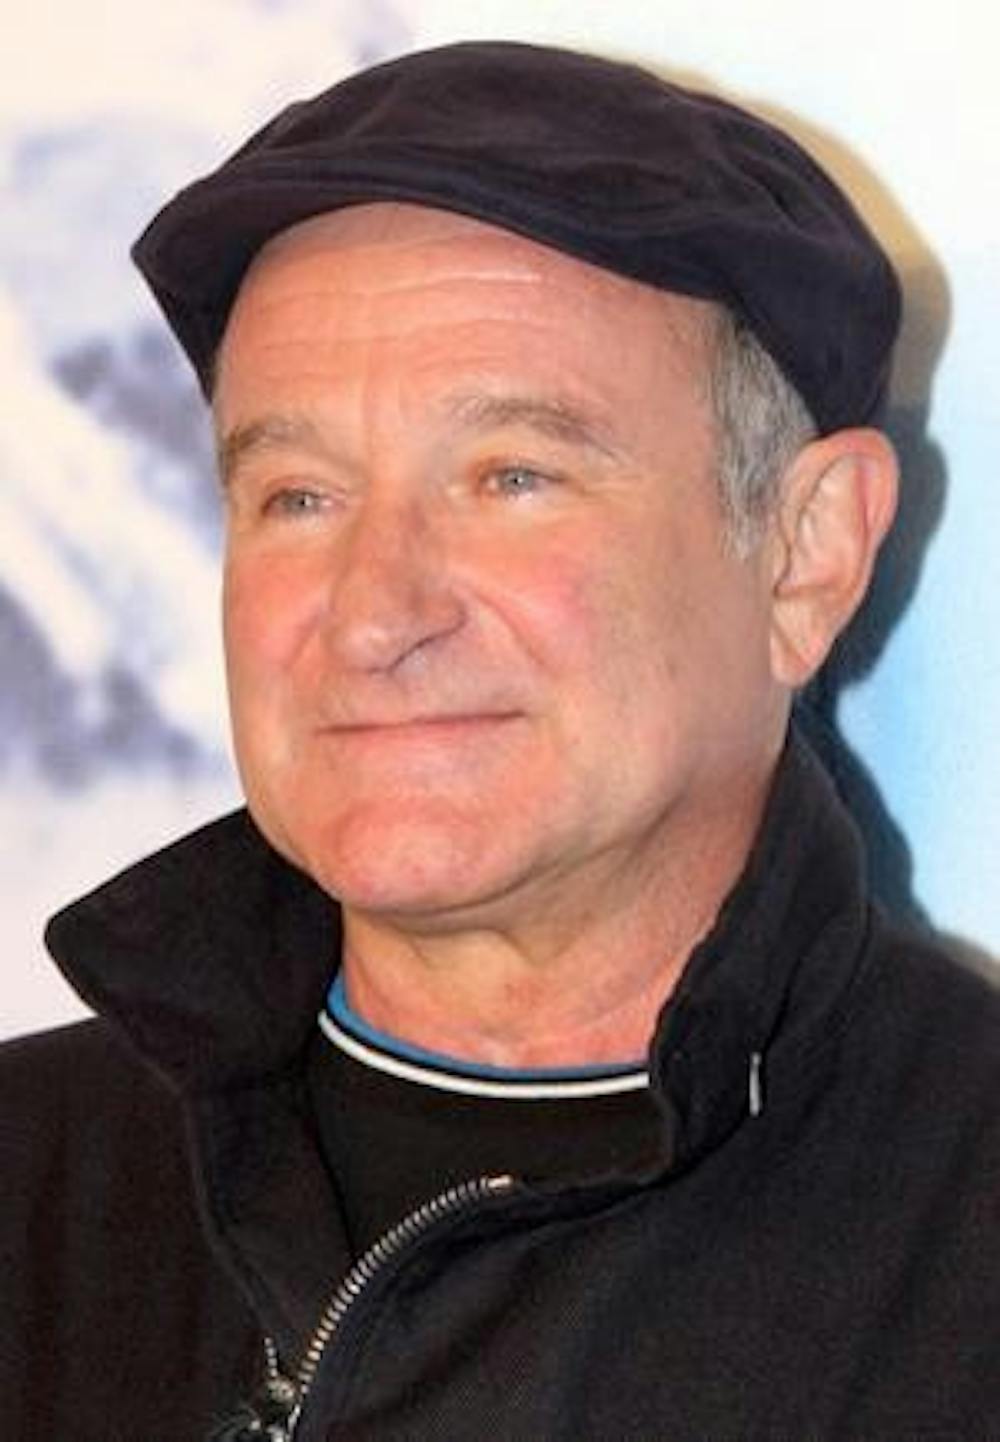 Robin Williams was found dead at age 63. The actor is famous for his roles in "Mrs. Doubtfire," "Dead Poets Society" and "Good Will Hunting." PHOTO COURTESY OF WIKIPEDIA.ORG